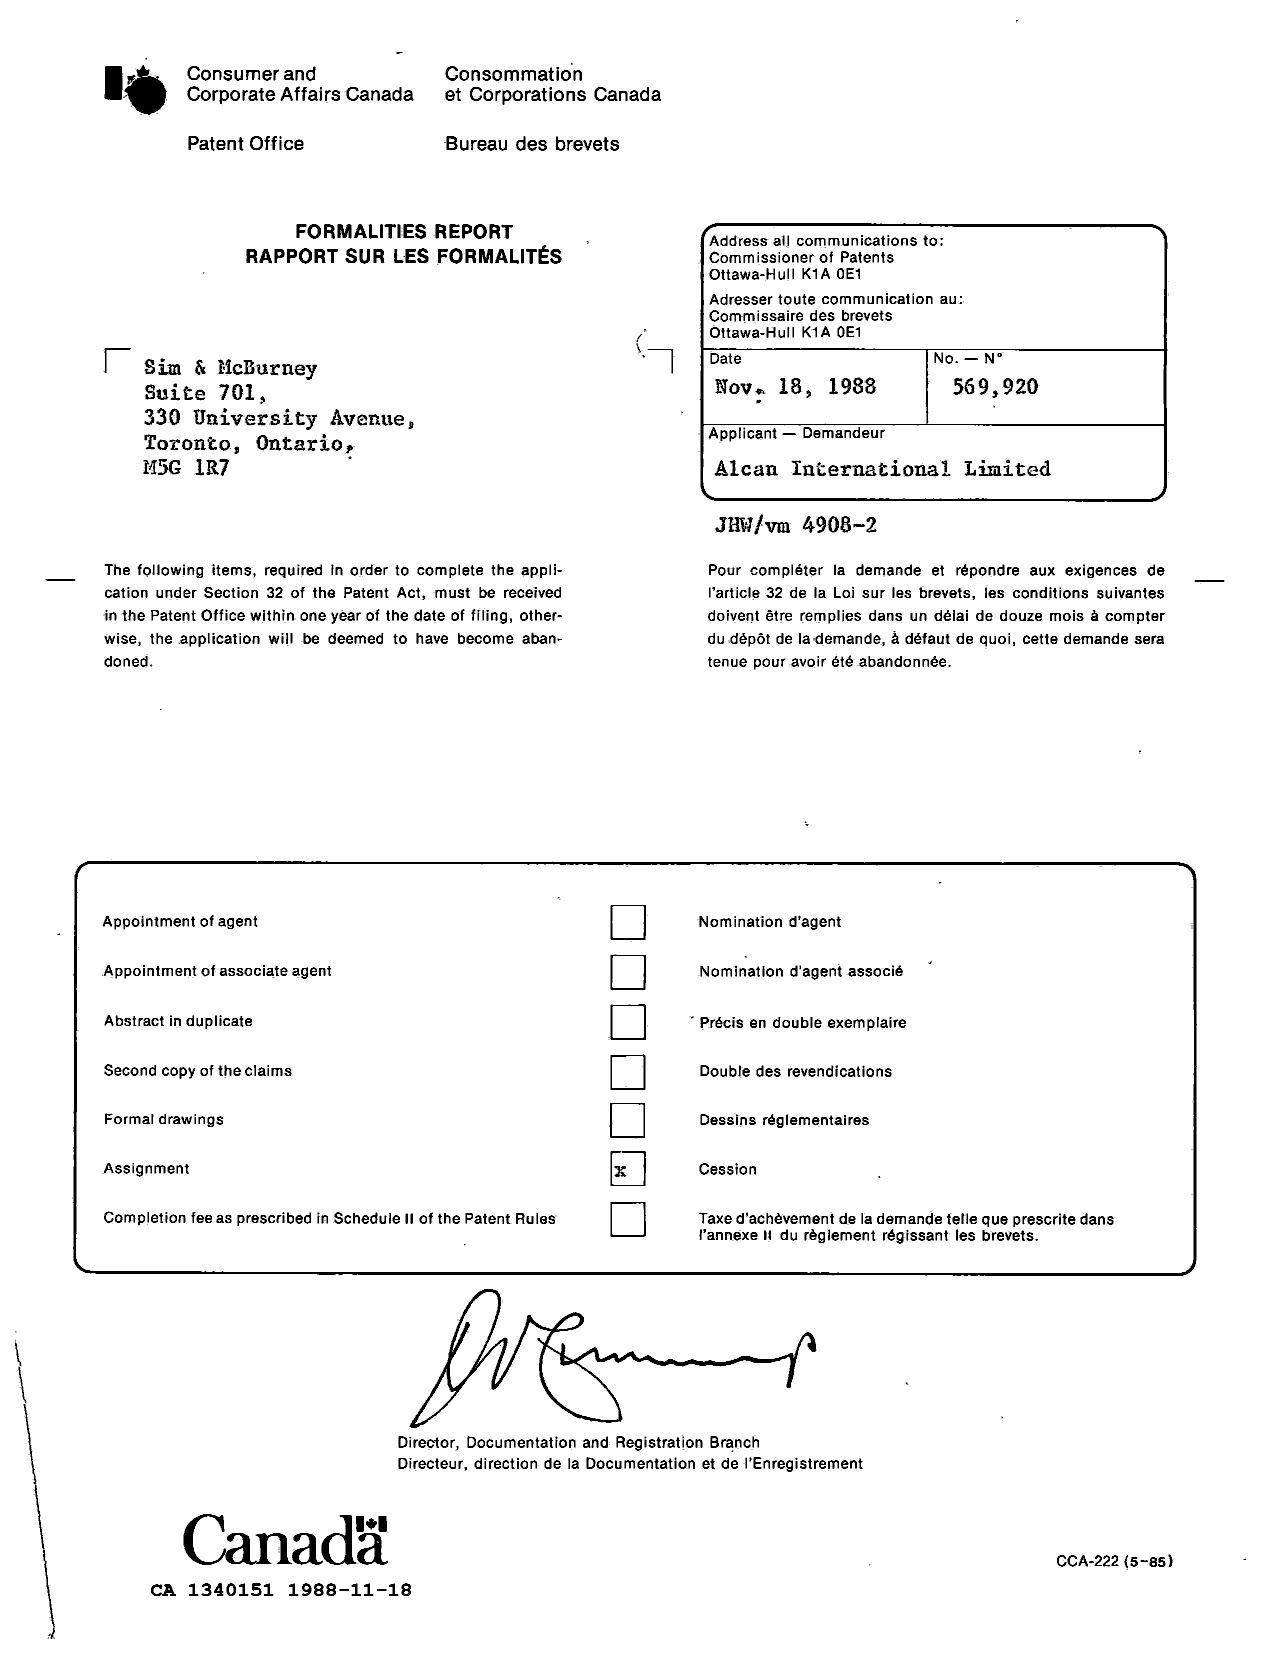 Canadian Patent Document 1340151. Office Letter 19881118. Image 1 of 1